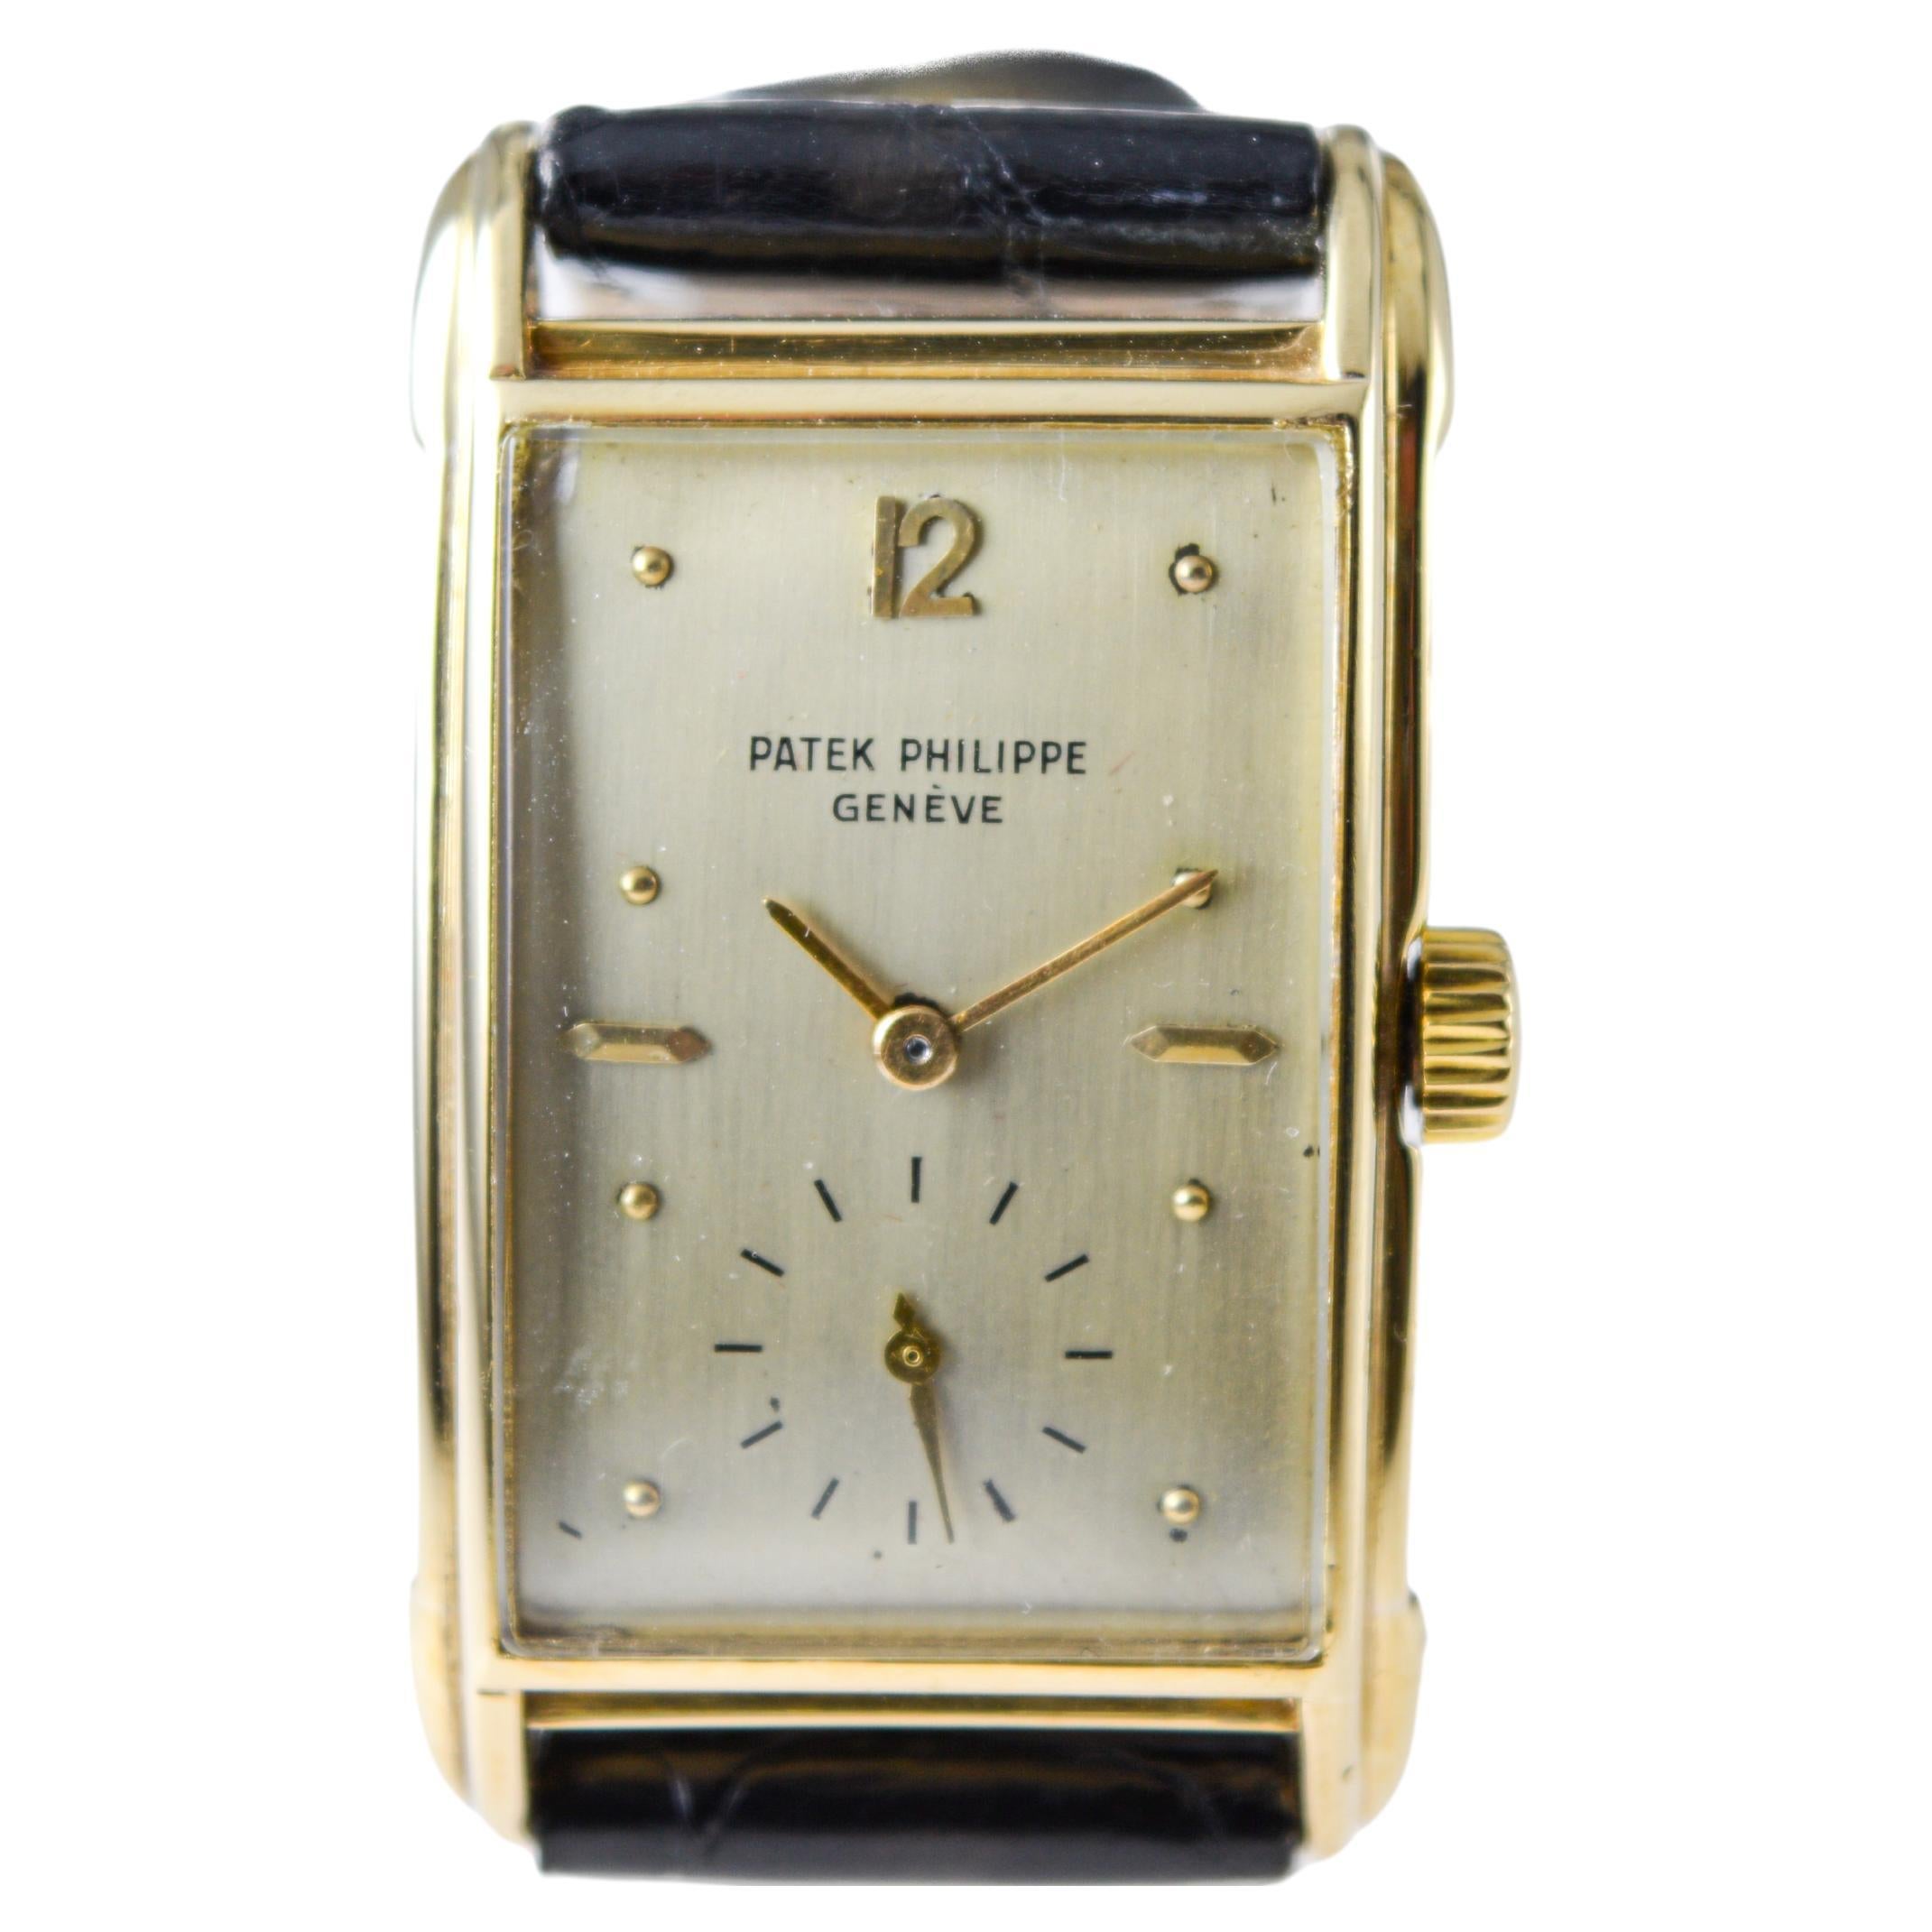 Patek Philippe Yellow Gold Art Deco Style Manual Watch, circa 1948 with Archival For Sale 5